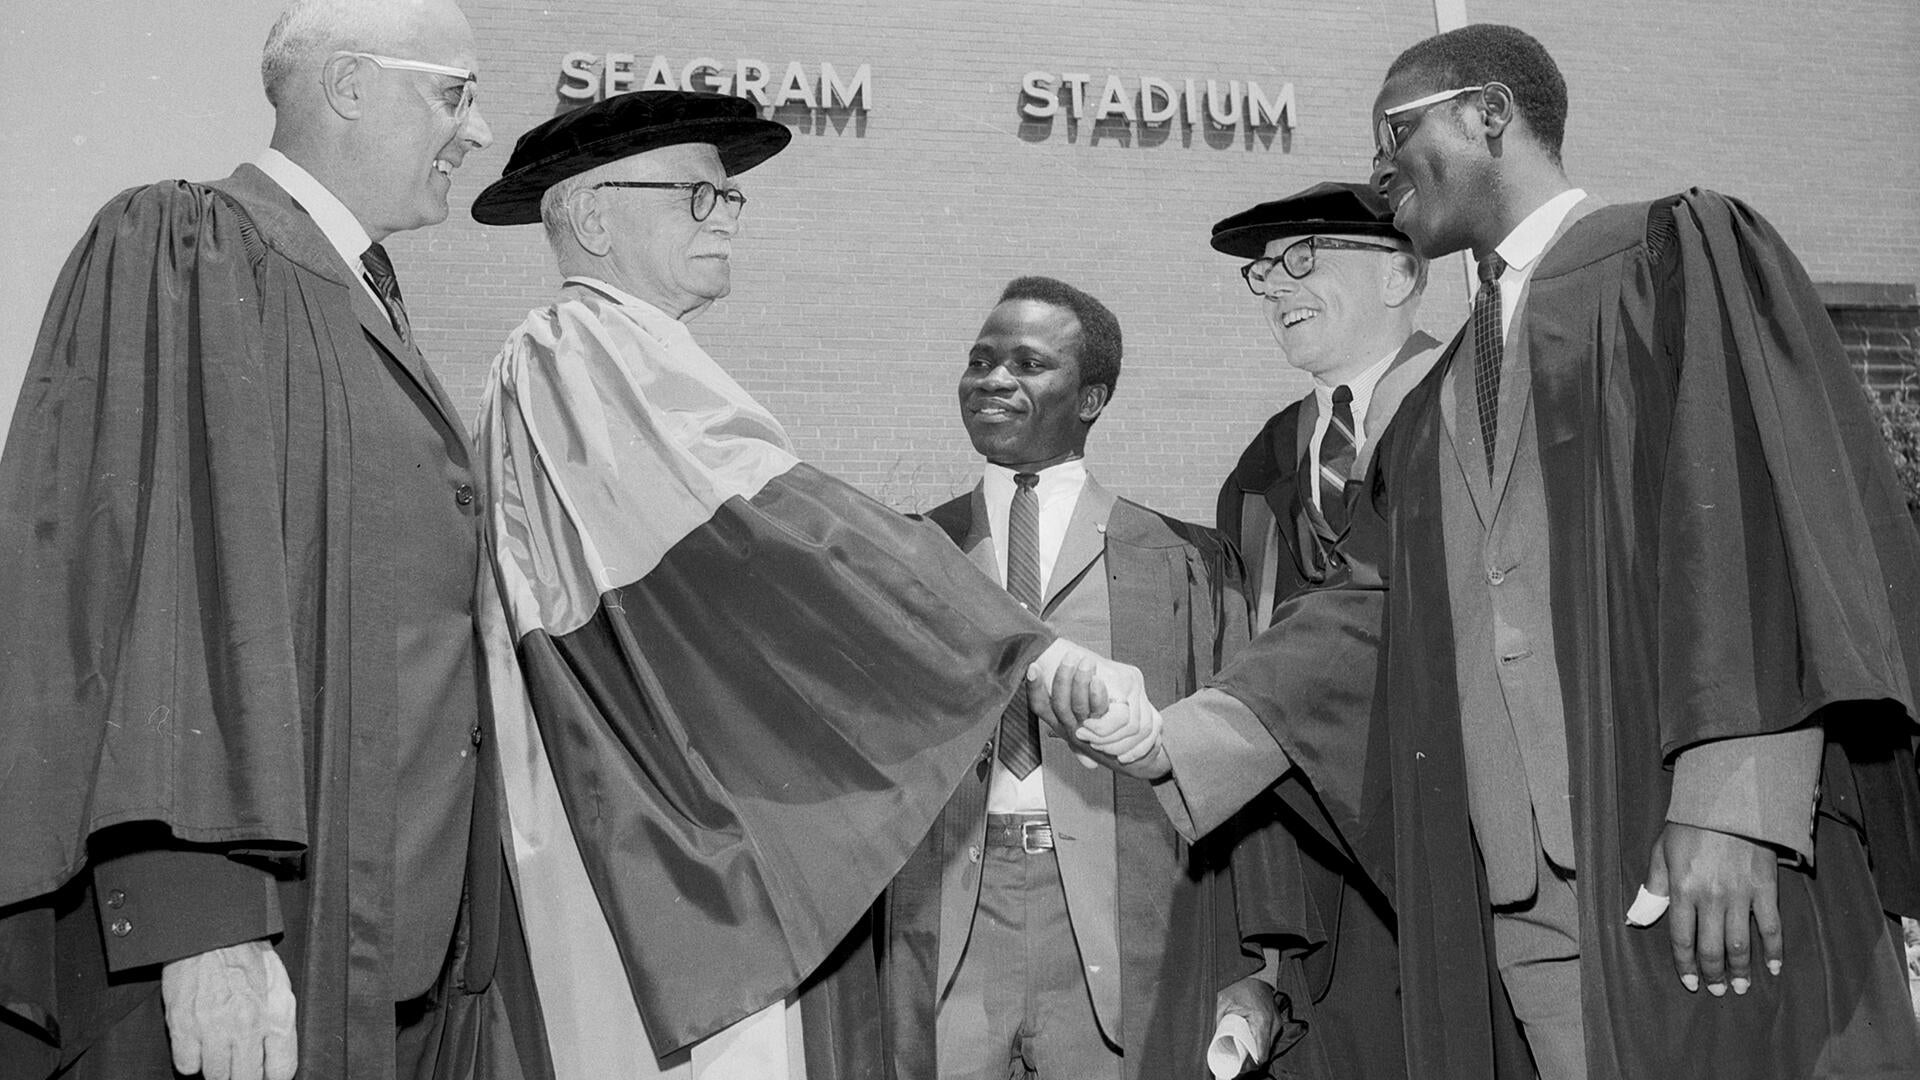 Black and white image of people in graduation gowns shaking hands